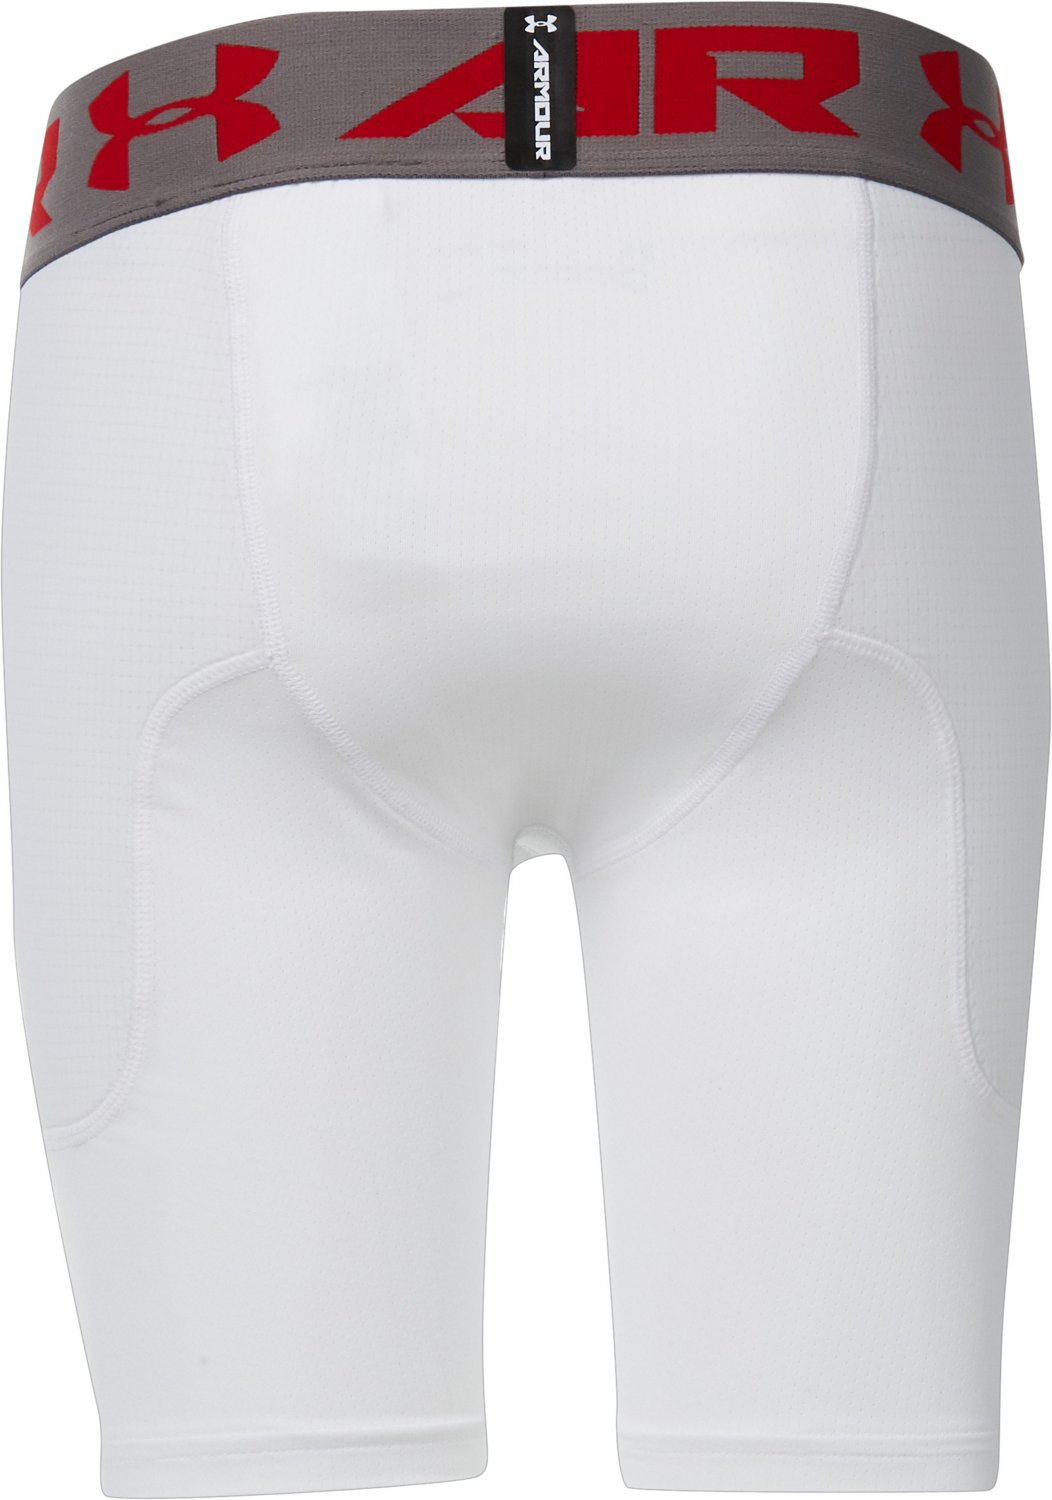 Under Armour Boys' Utility Slider Shorts with Cup